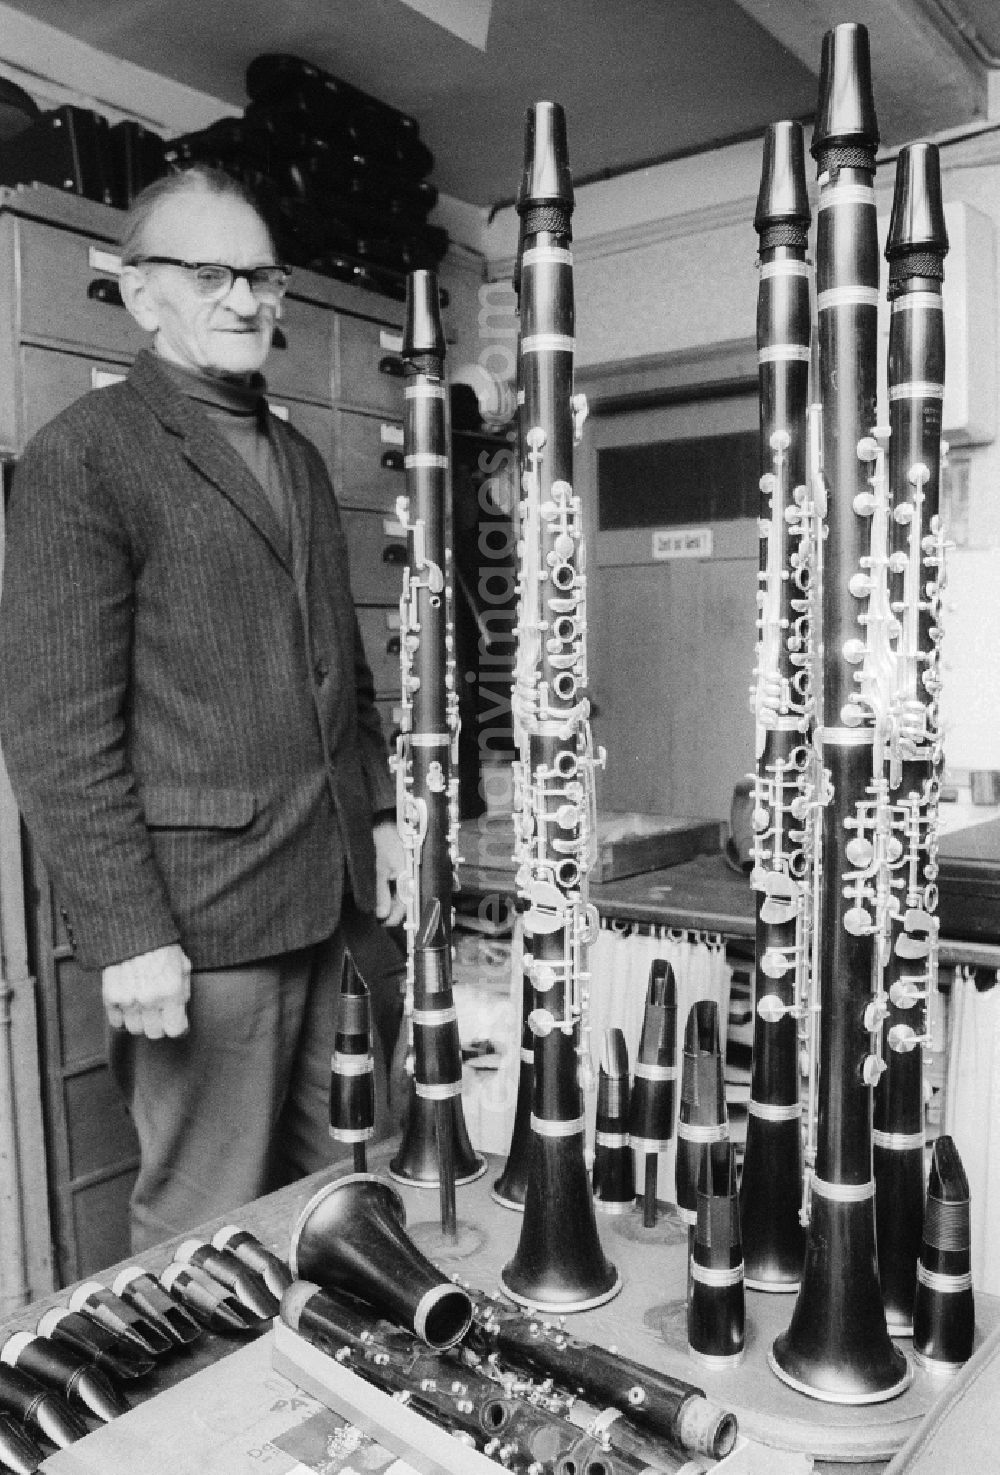 GDR image archive: Wernitzgrün - The woodwind doer / clarinet farmer Rudi Meinel in his workshop in Wernitzgruen in the federal state Saxony in the area of the former GDR, German democratic republic